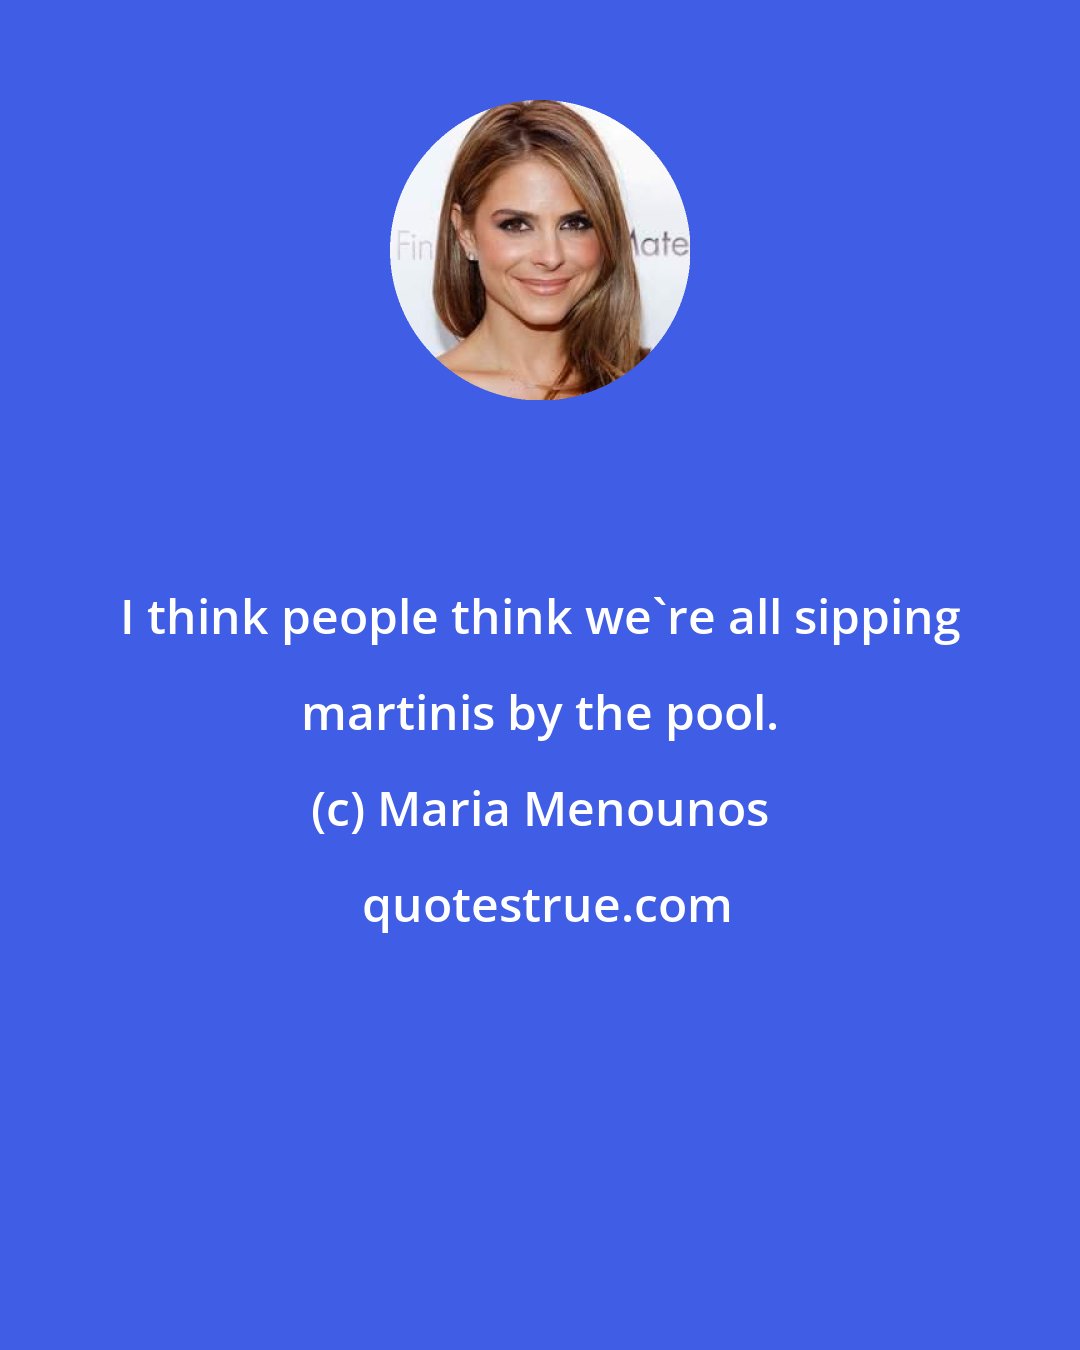 Maria Menounos: I think people think we're all sipping martinis by the pool.